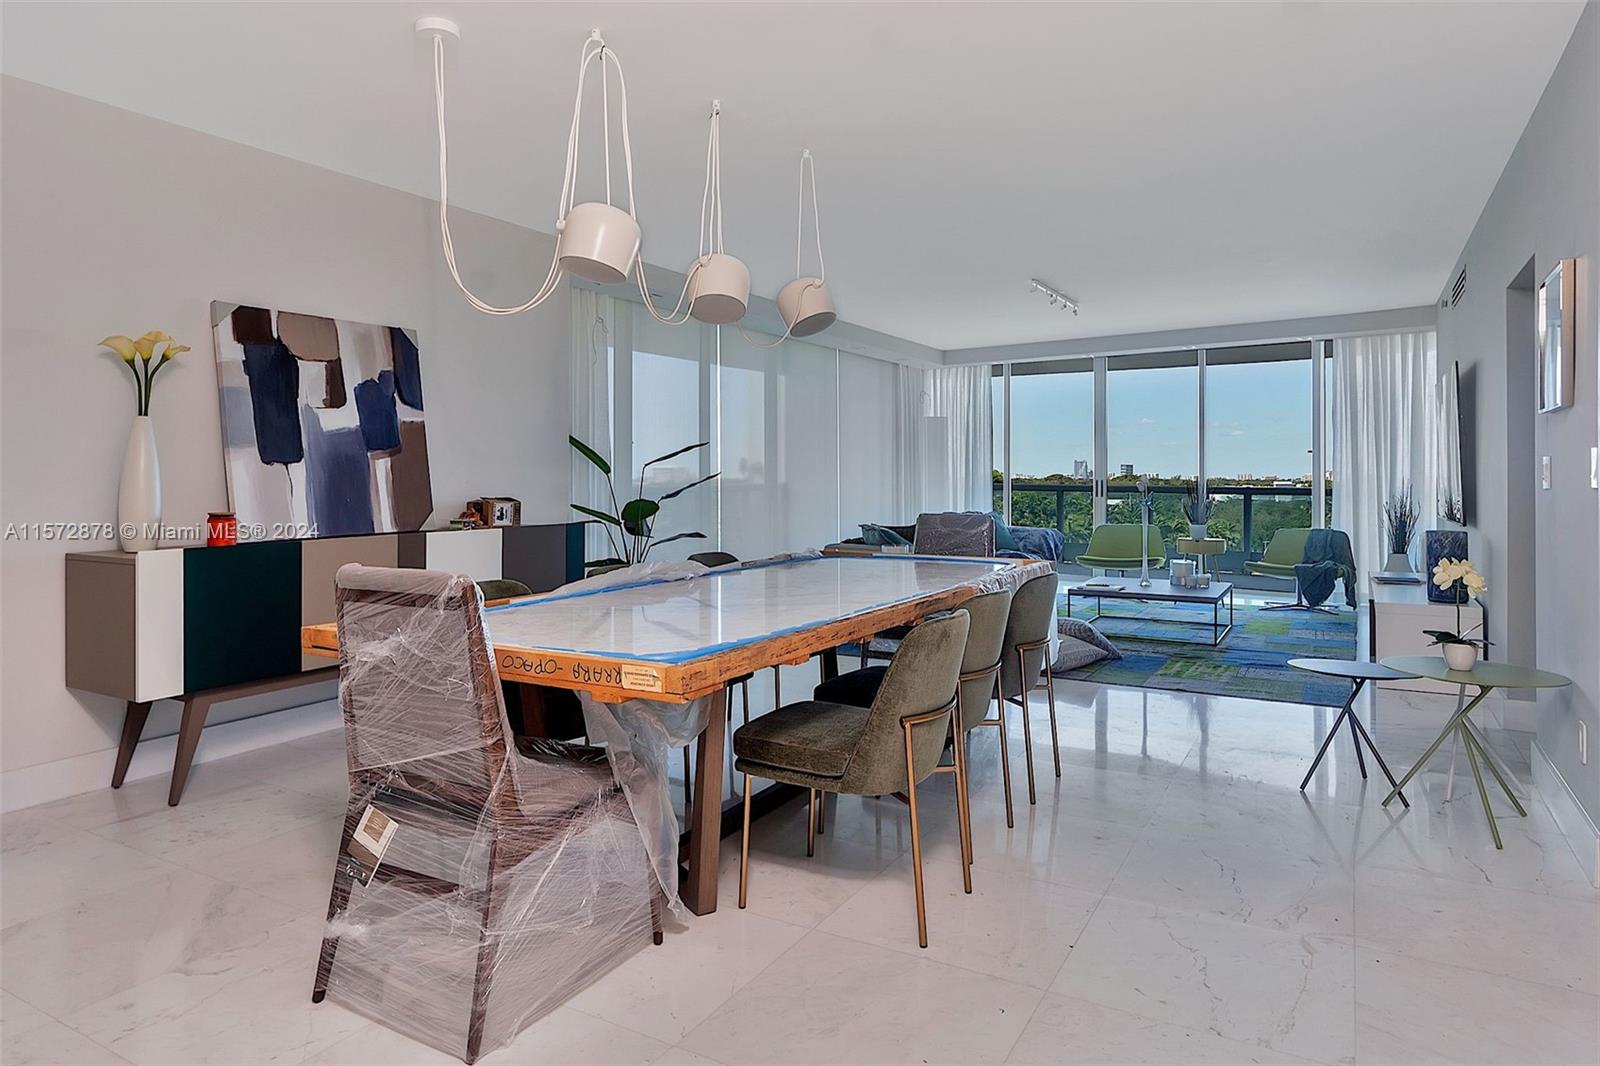 2127  Brickell Ave #905 For Sale A11572878, FL